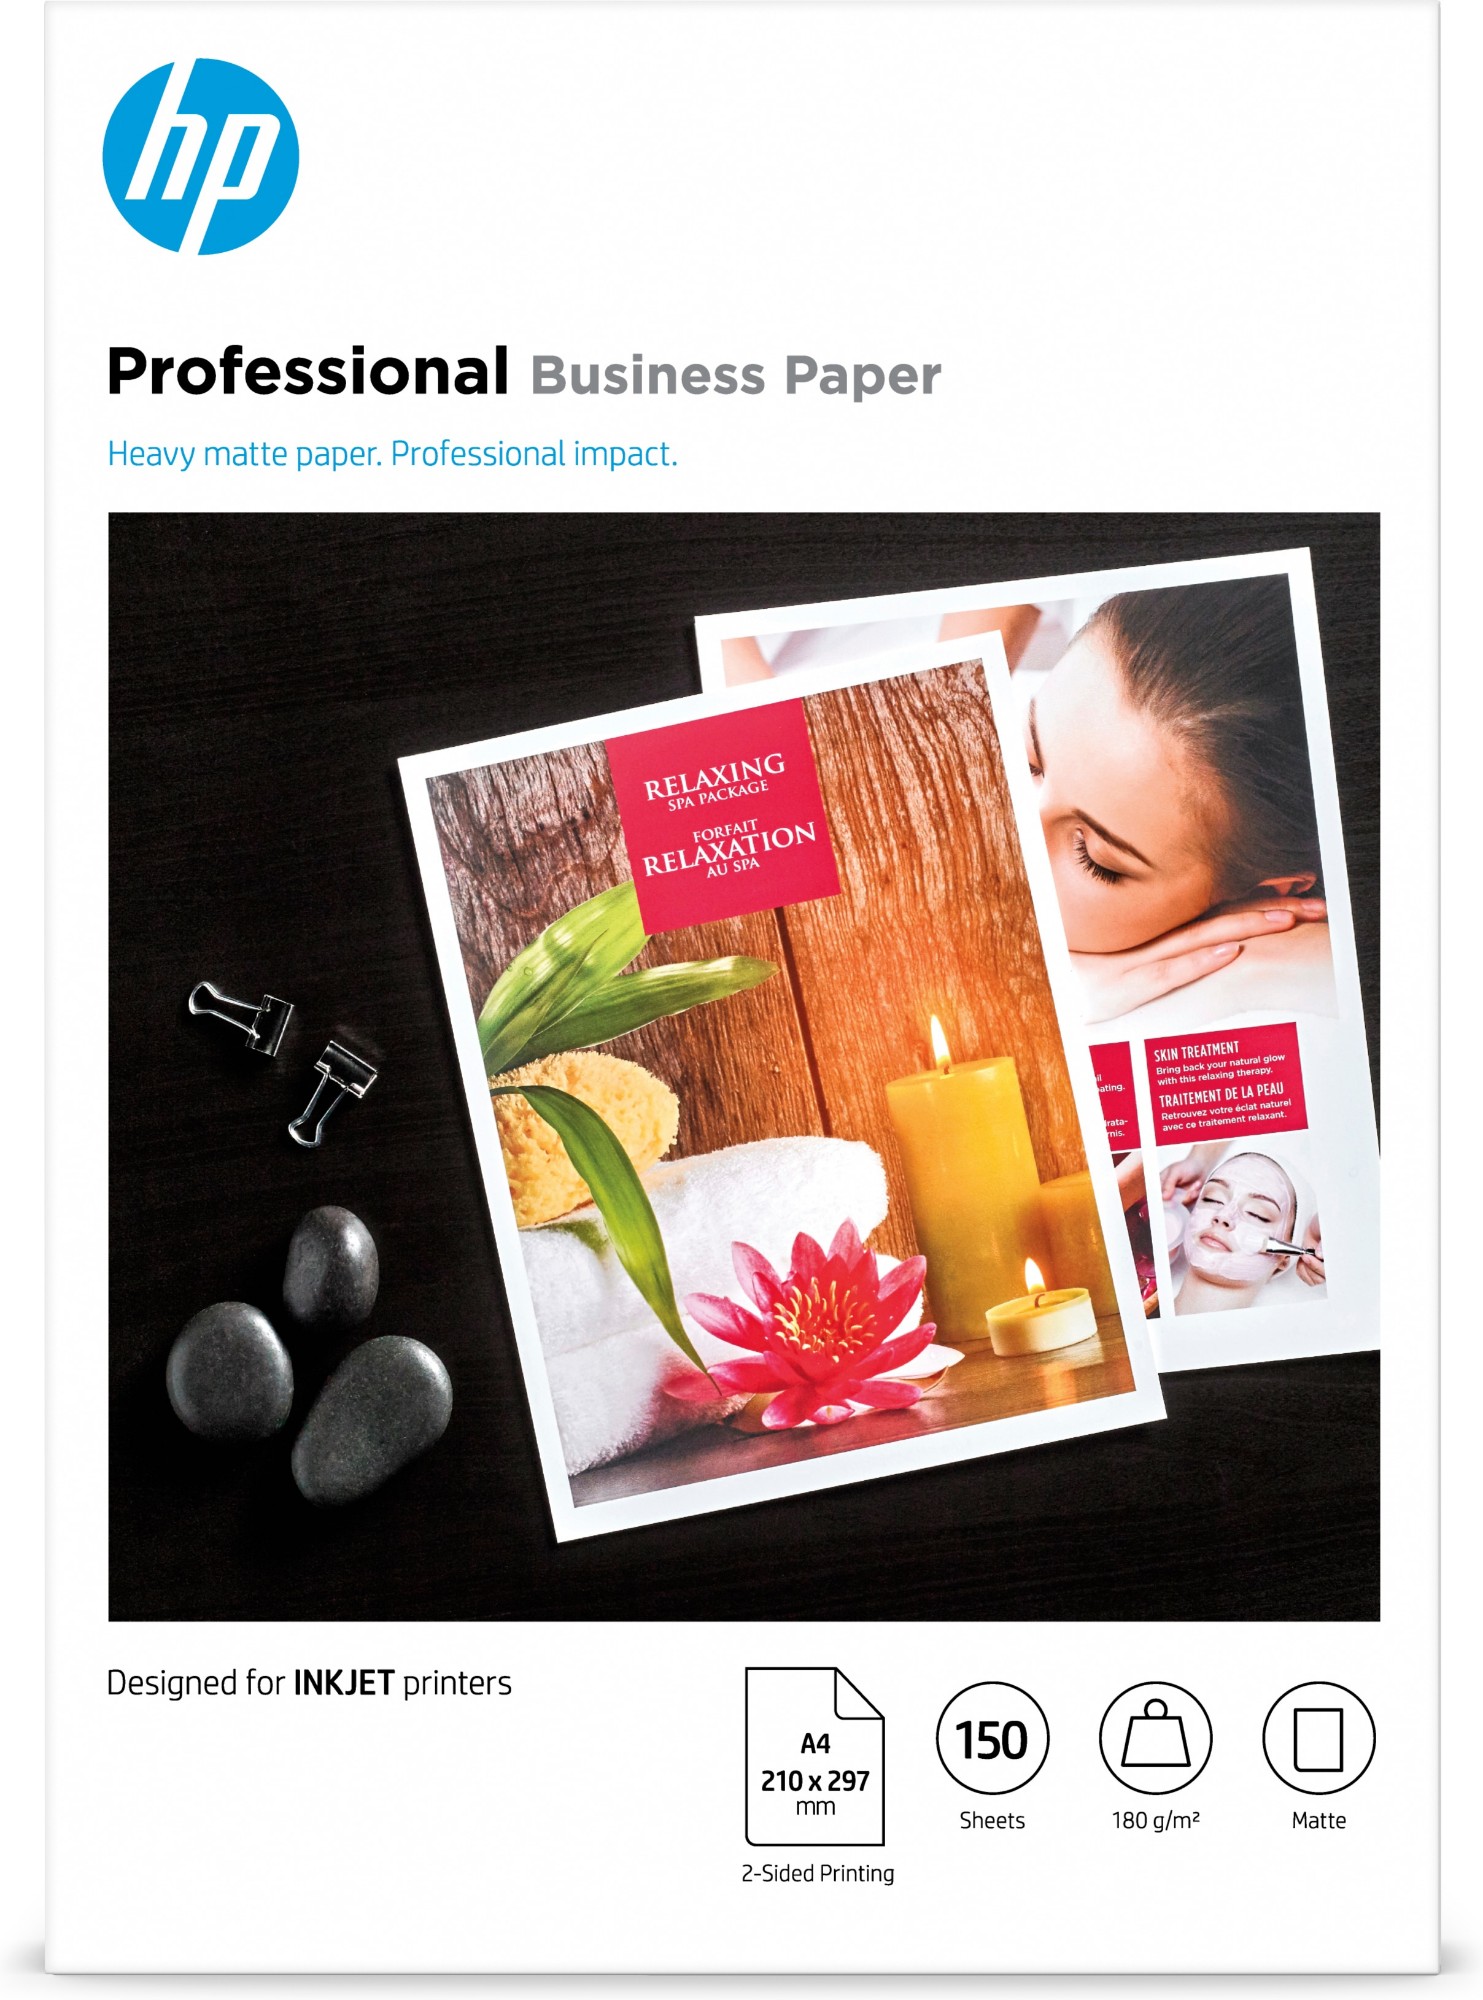 HP All-in-One Printing Paper-250 sht/A4/210 x 297 mm